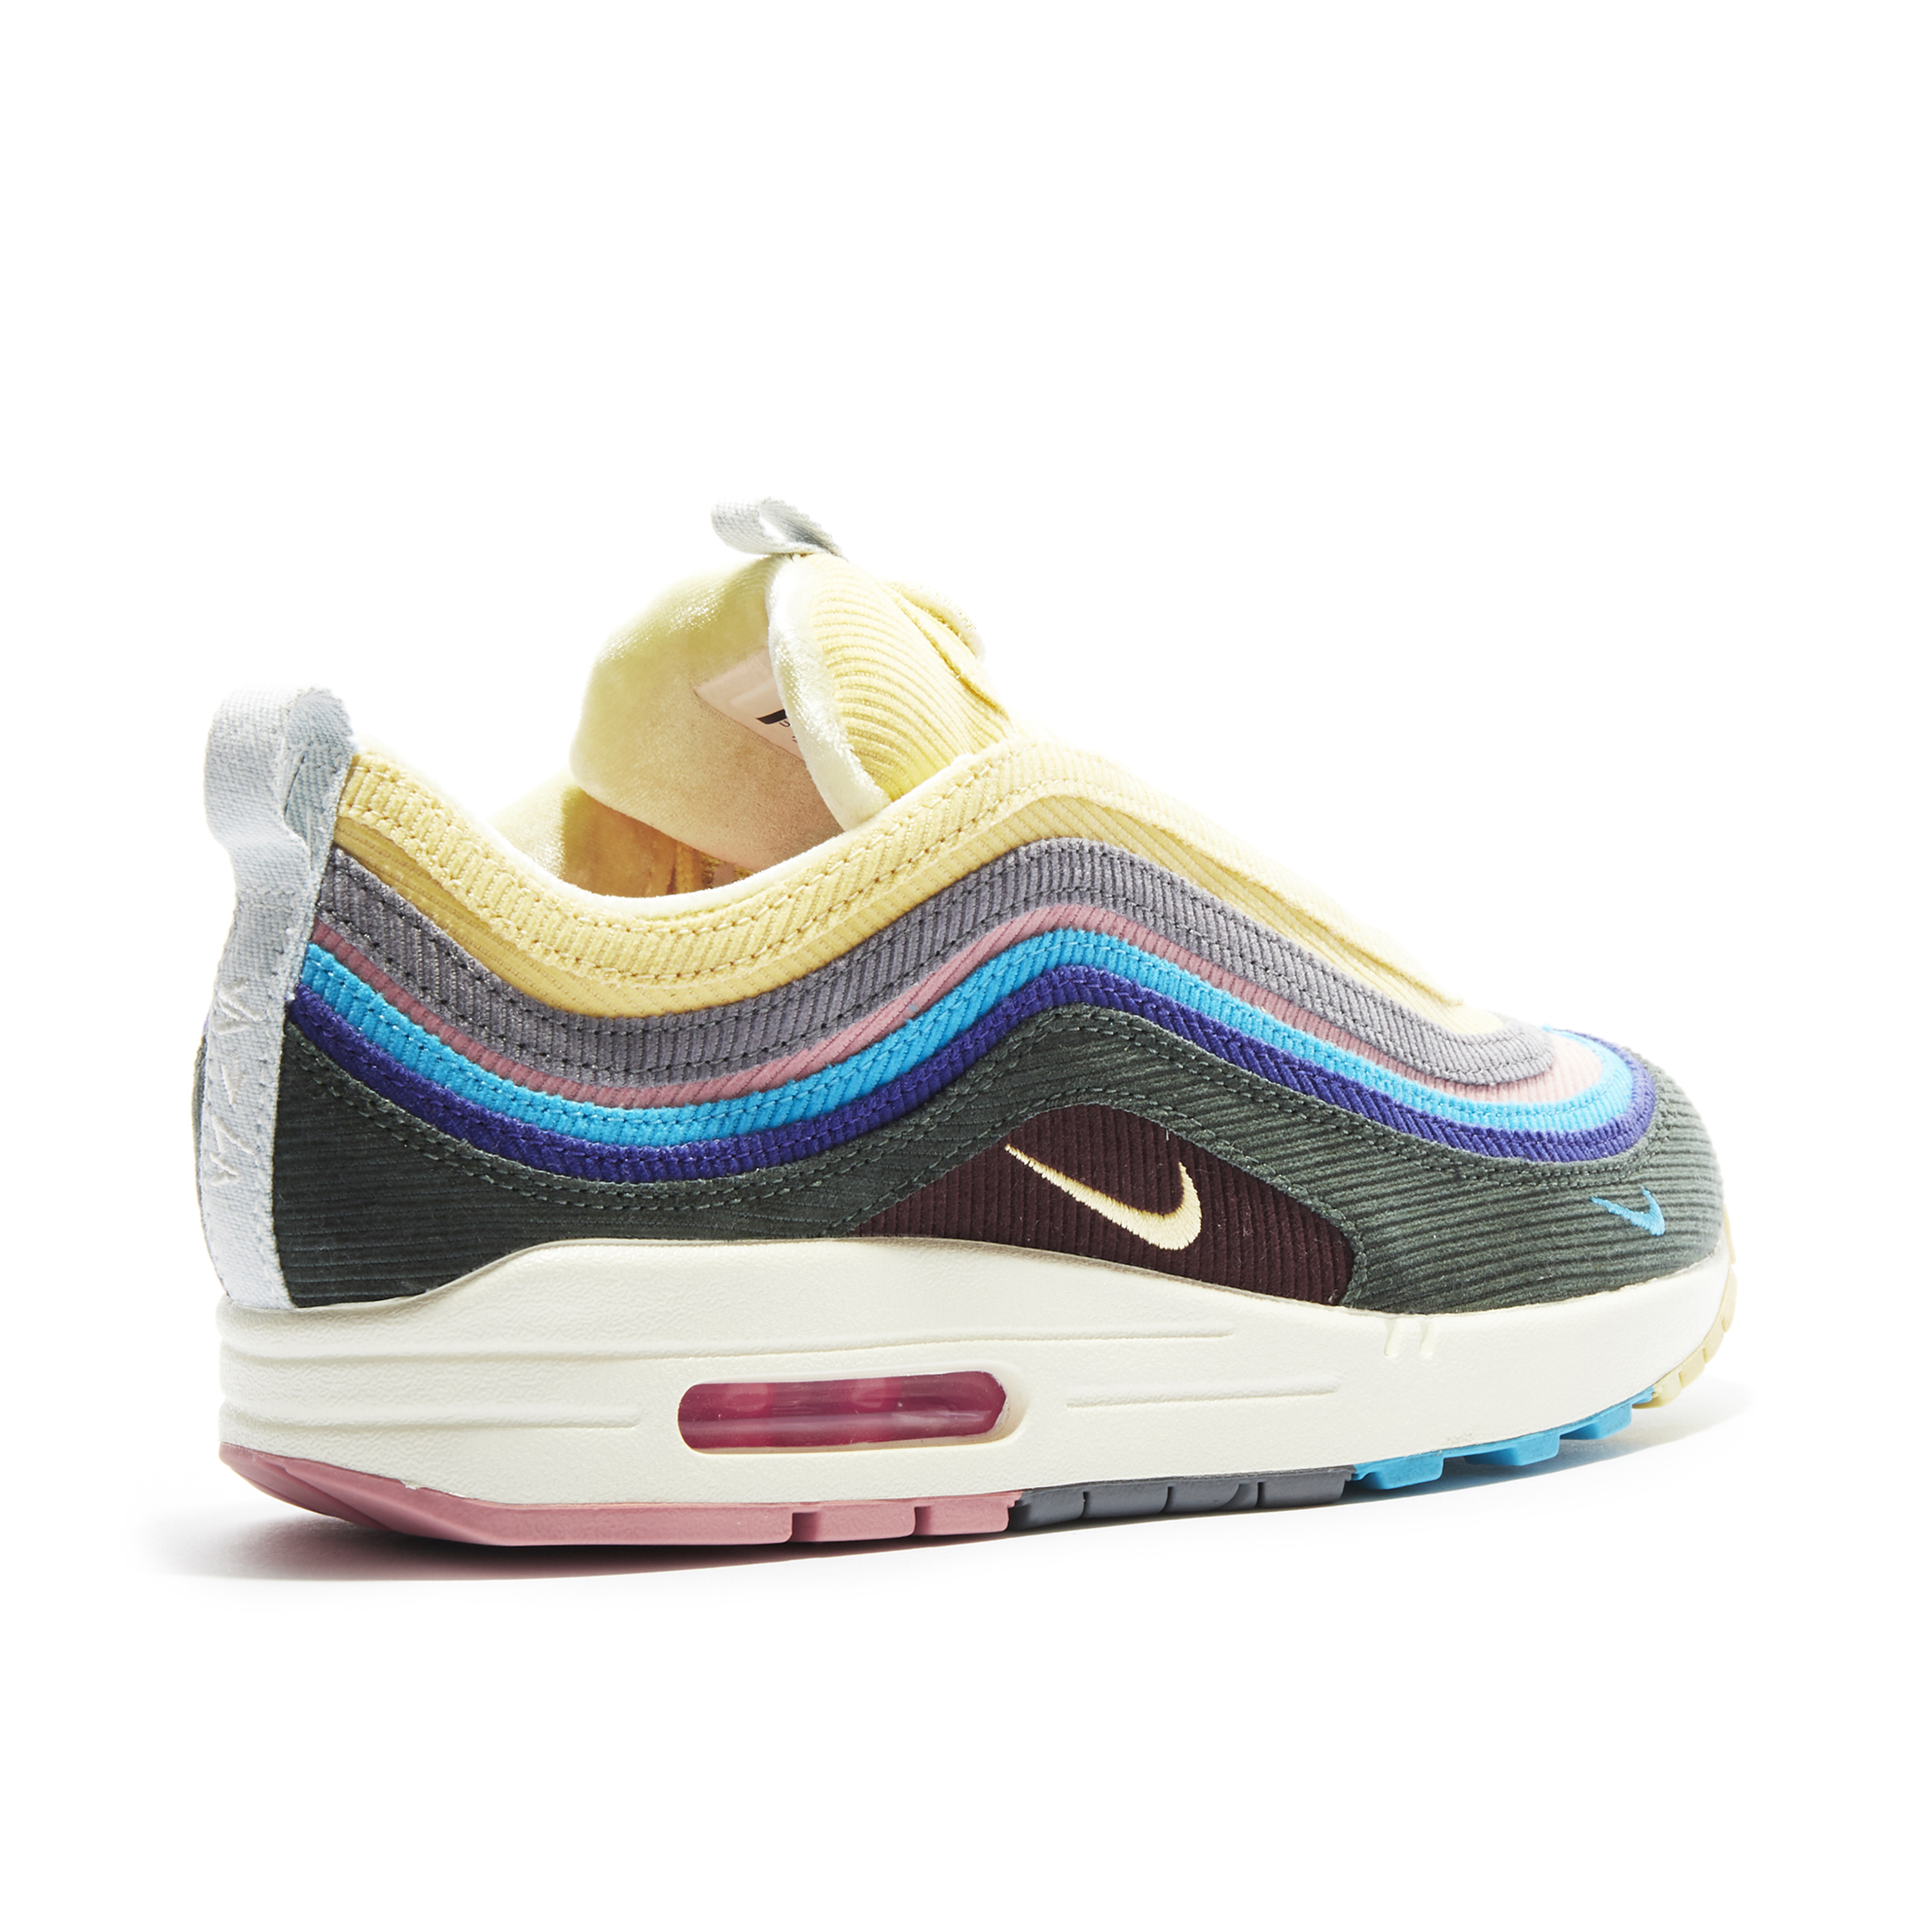 Air 1/97 x Sean Wotherspoon. Shop Laced Laced